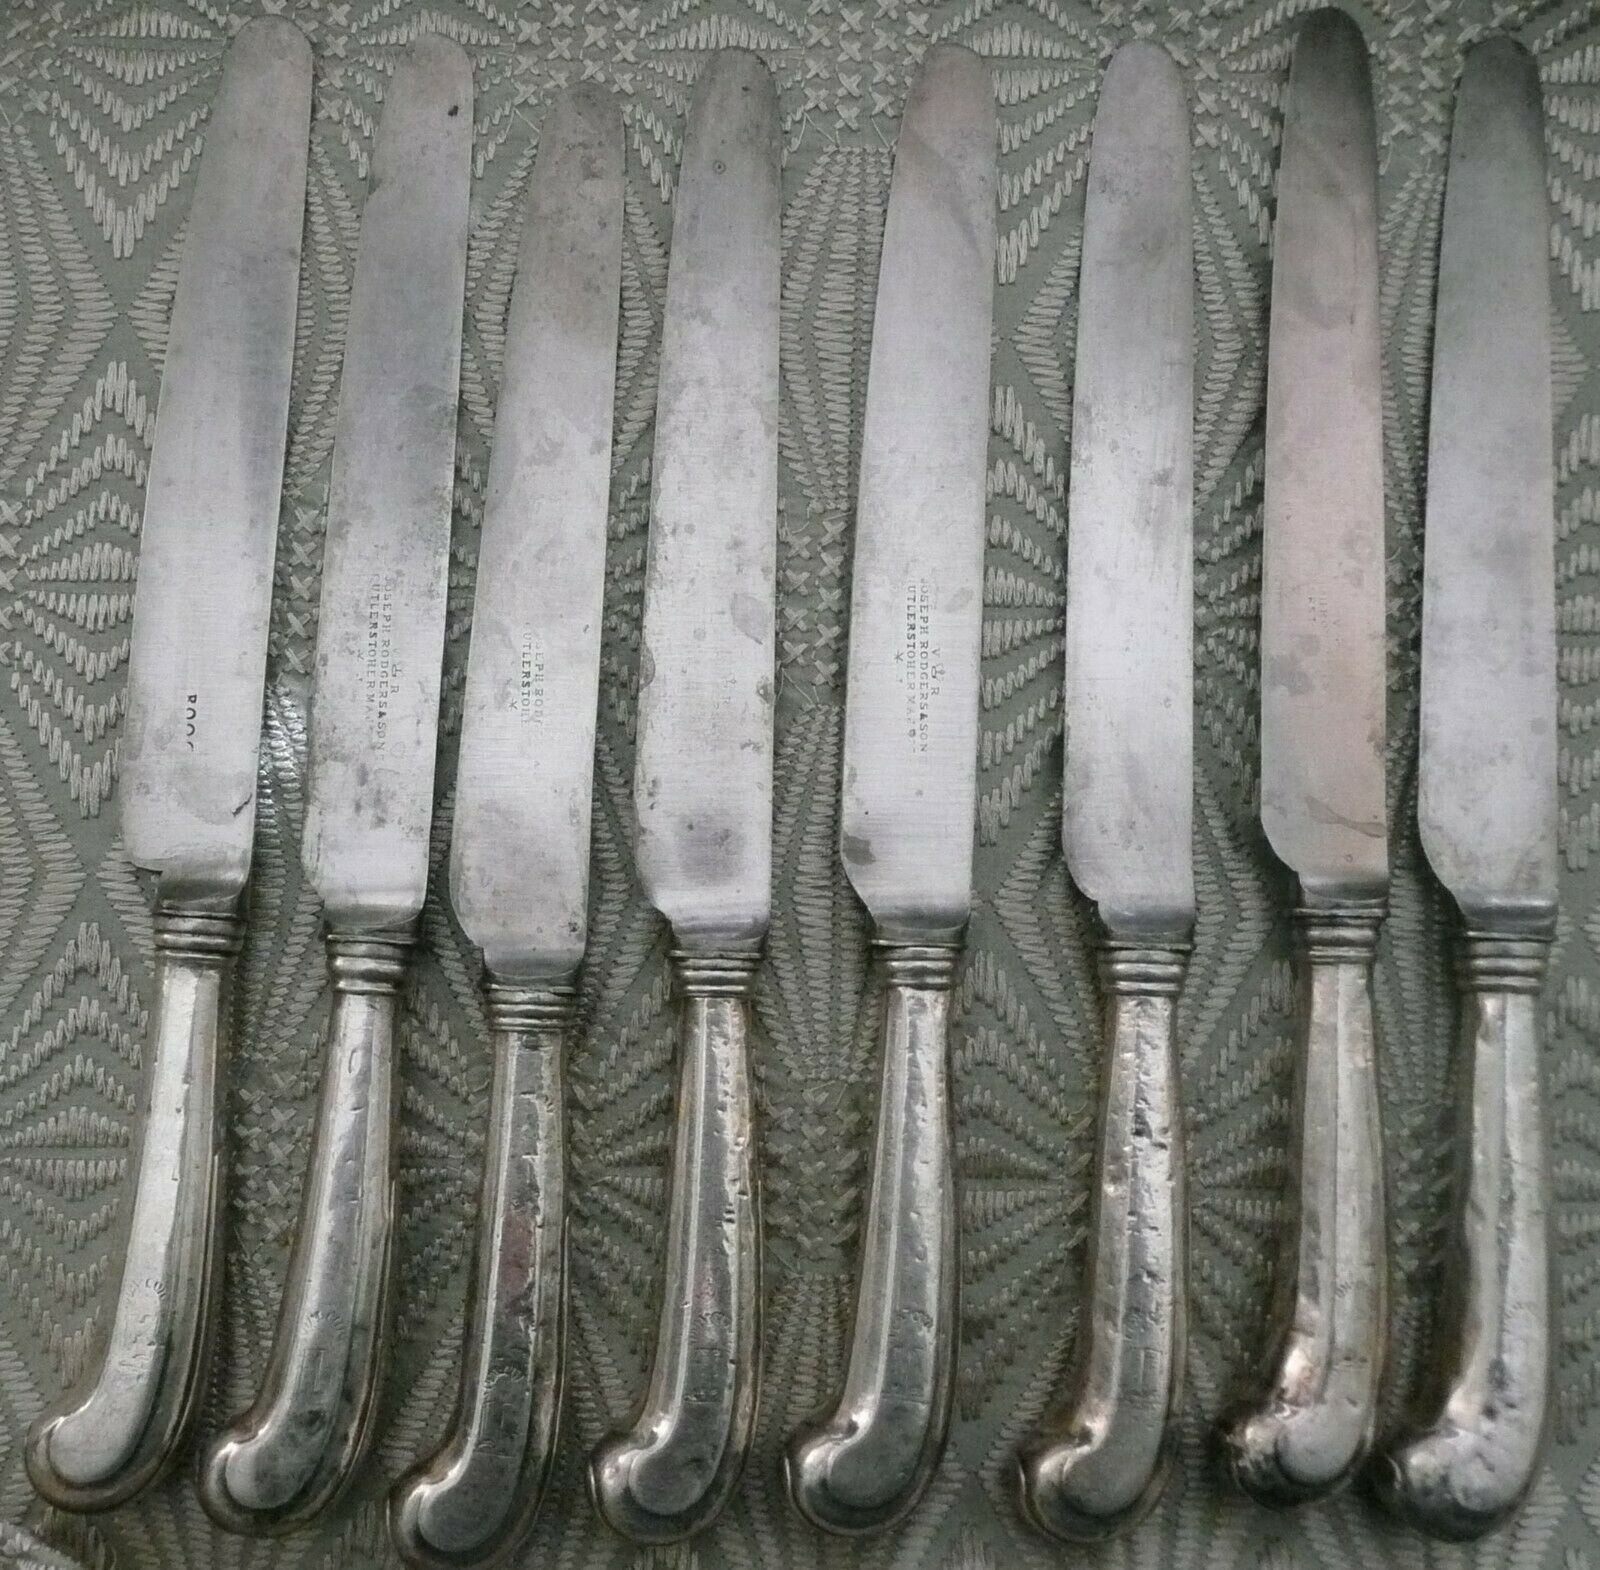 Eight George III period Silver Pistol Grip Table Knives, English circa 1760.